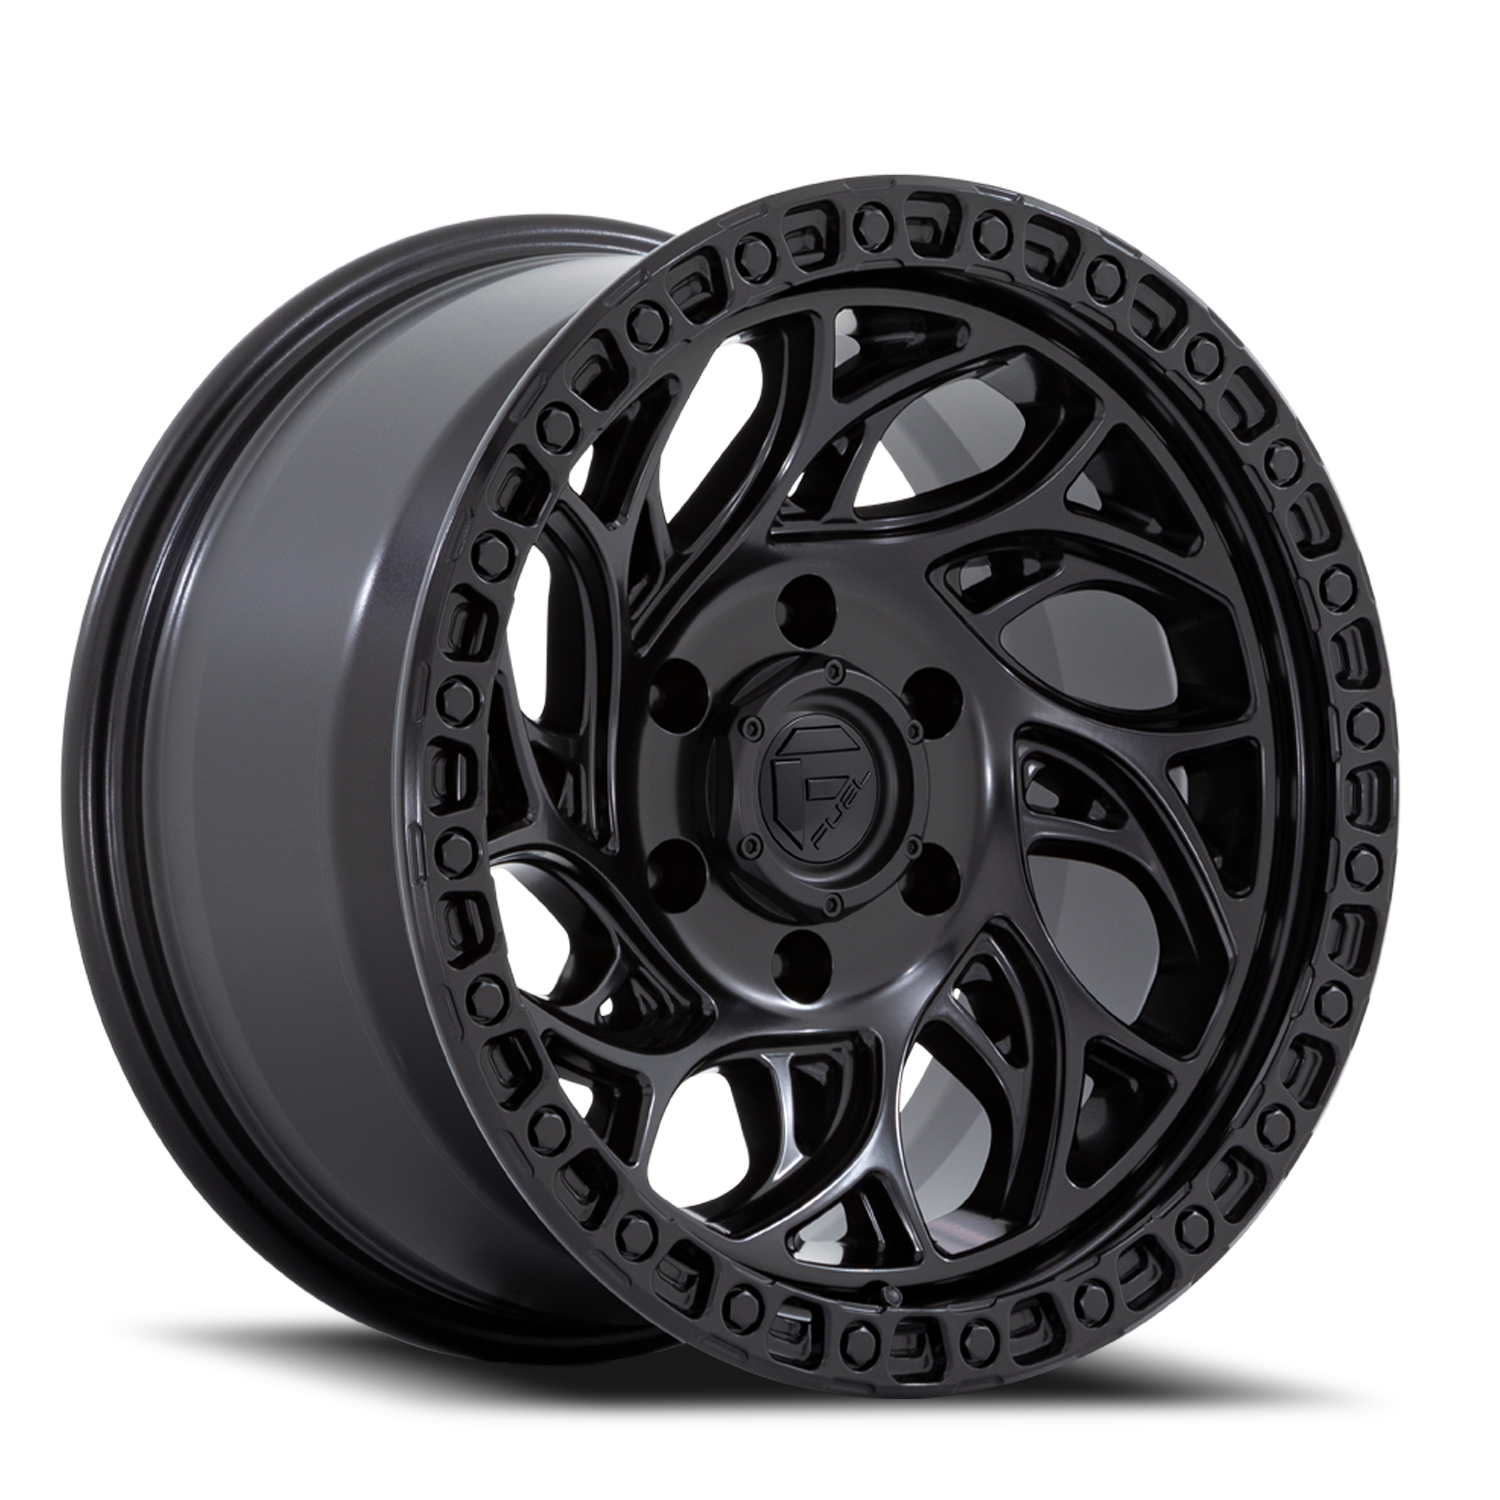 Aluminum Wheels 18X9 Runner OR D852 5 On 139.7 Blackout 78.1 Bore 1 Offset Fuel Off Road Wheels